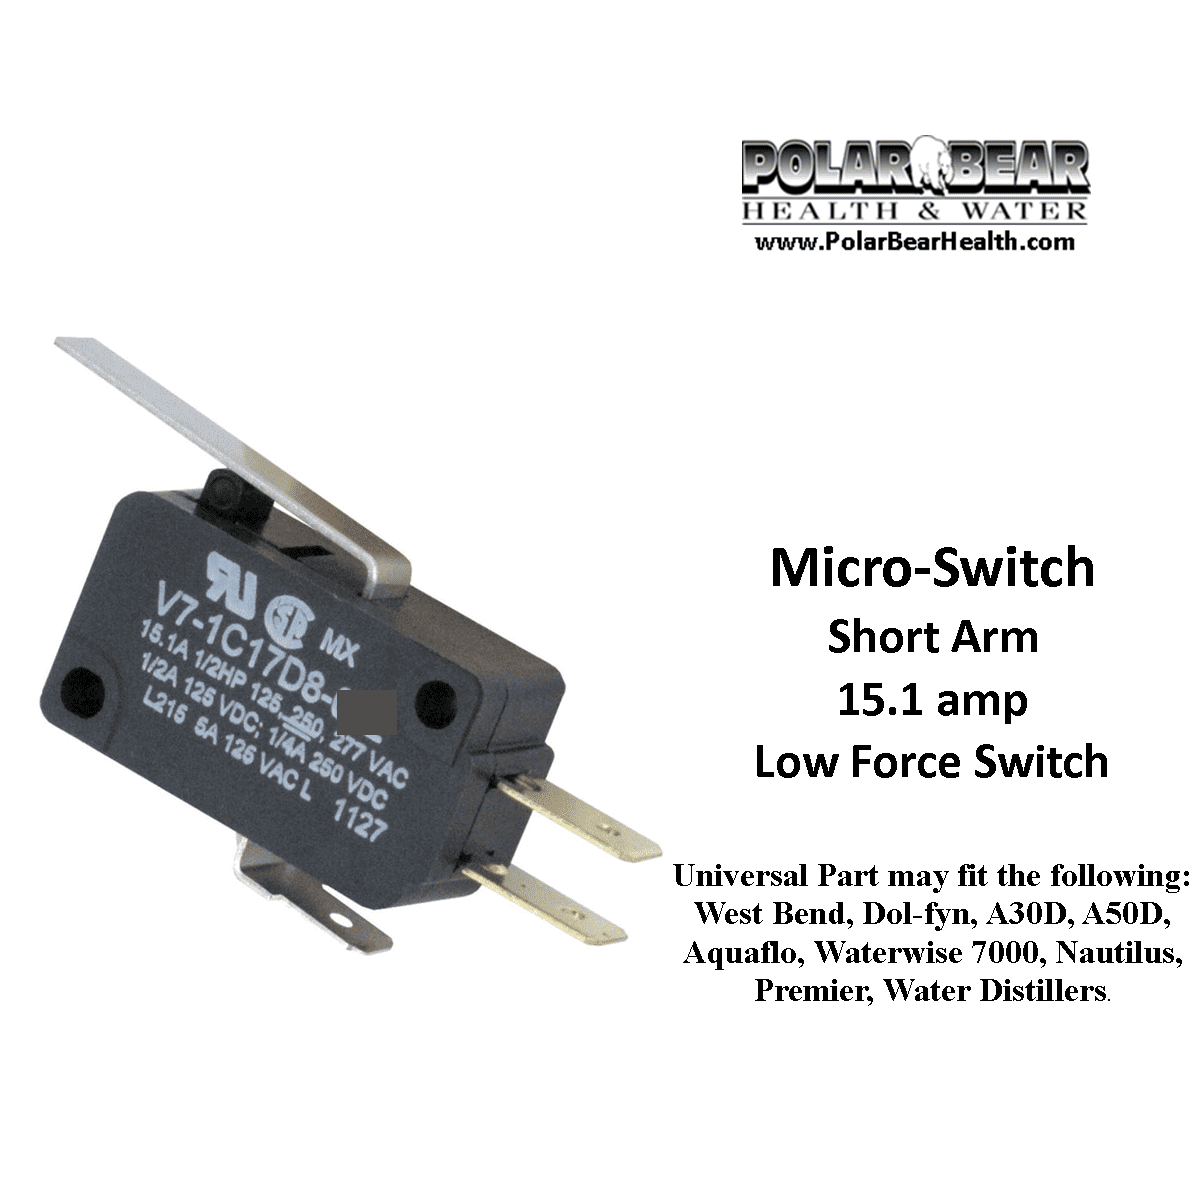 MicroSwitch Short arm Lo Force